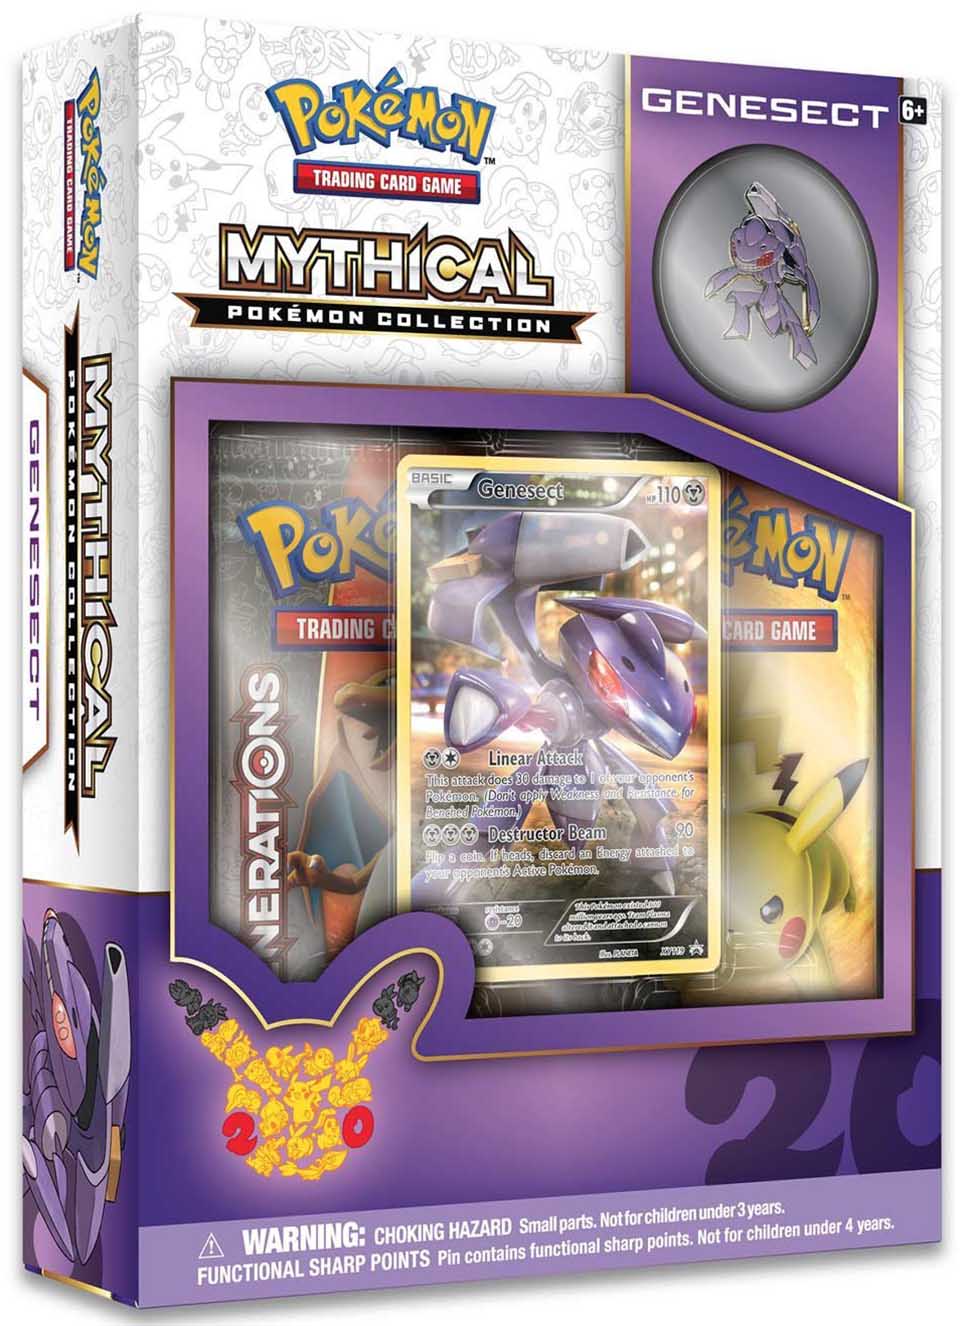 Pokémon Mythical Collection Genesect Box